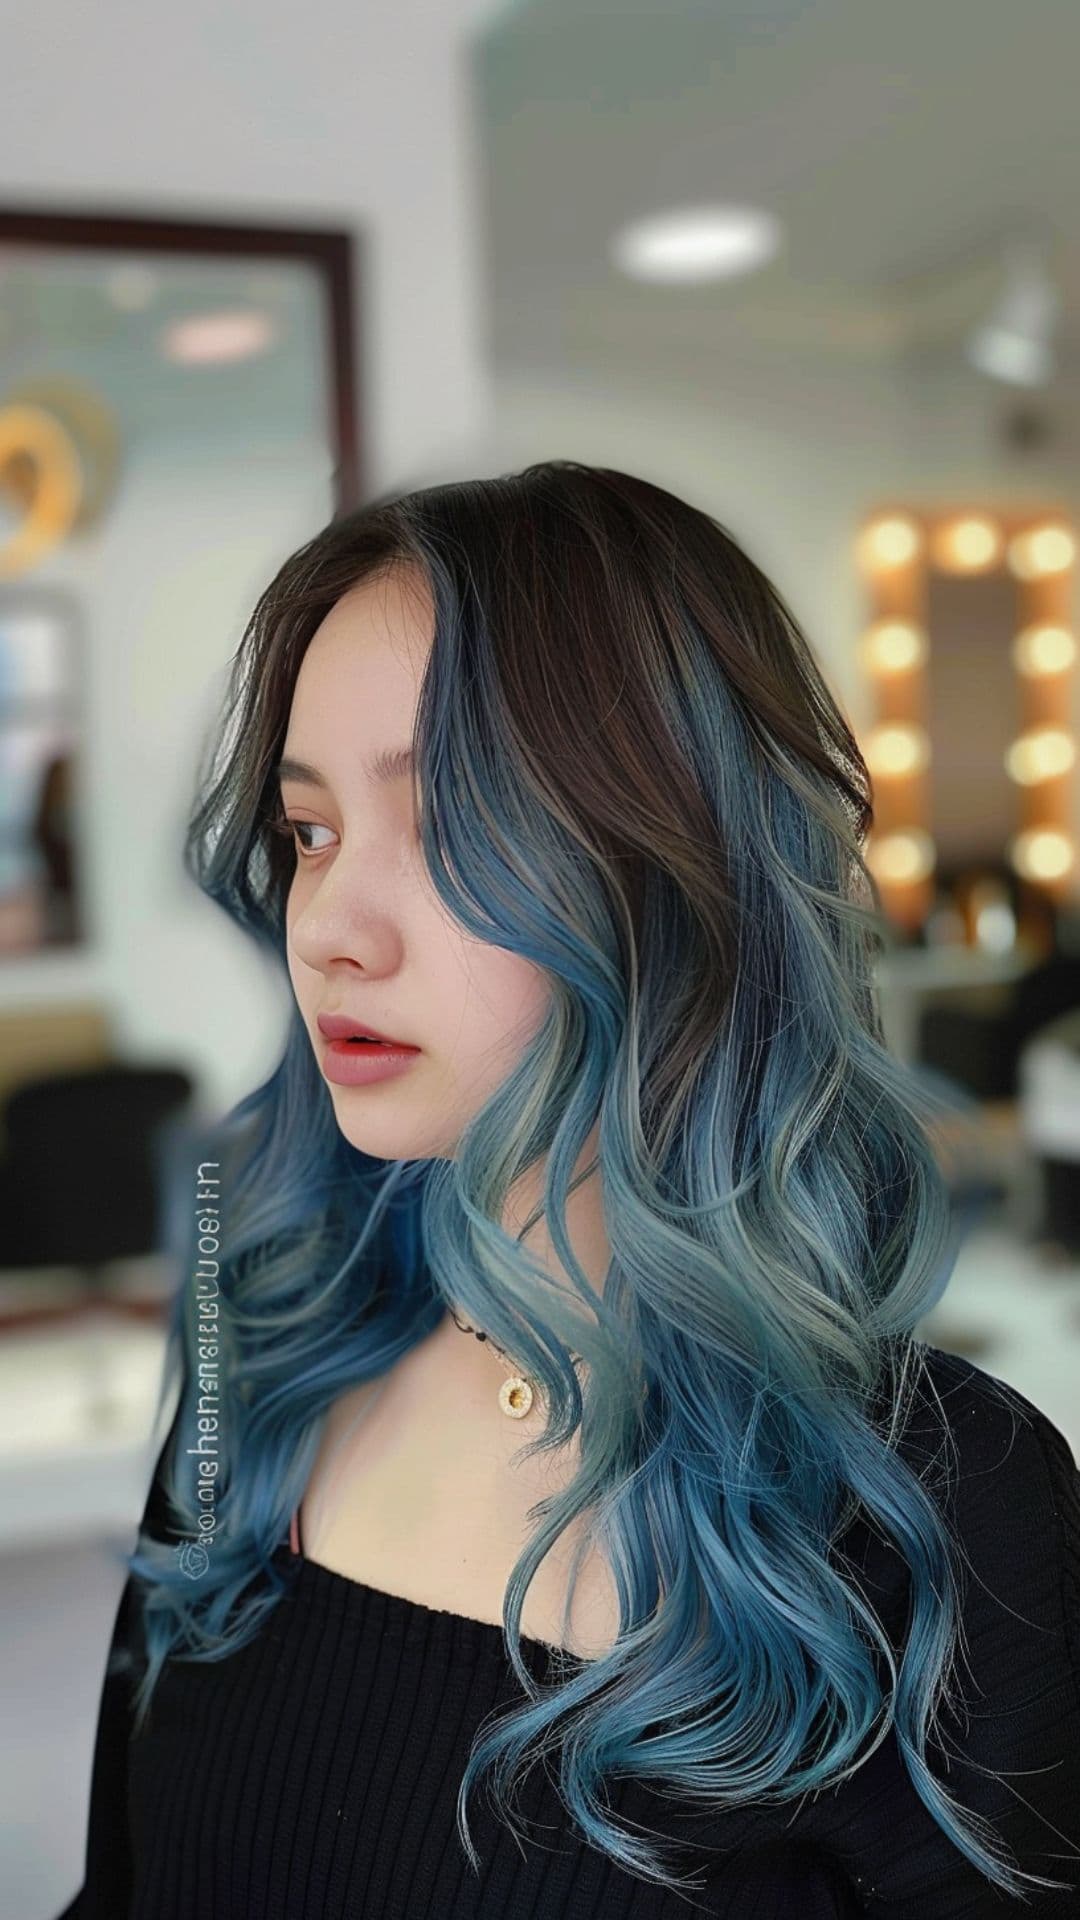 A young woman modelling a blue ombre hair.